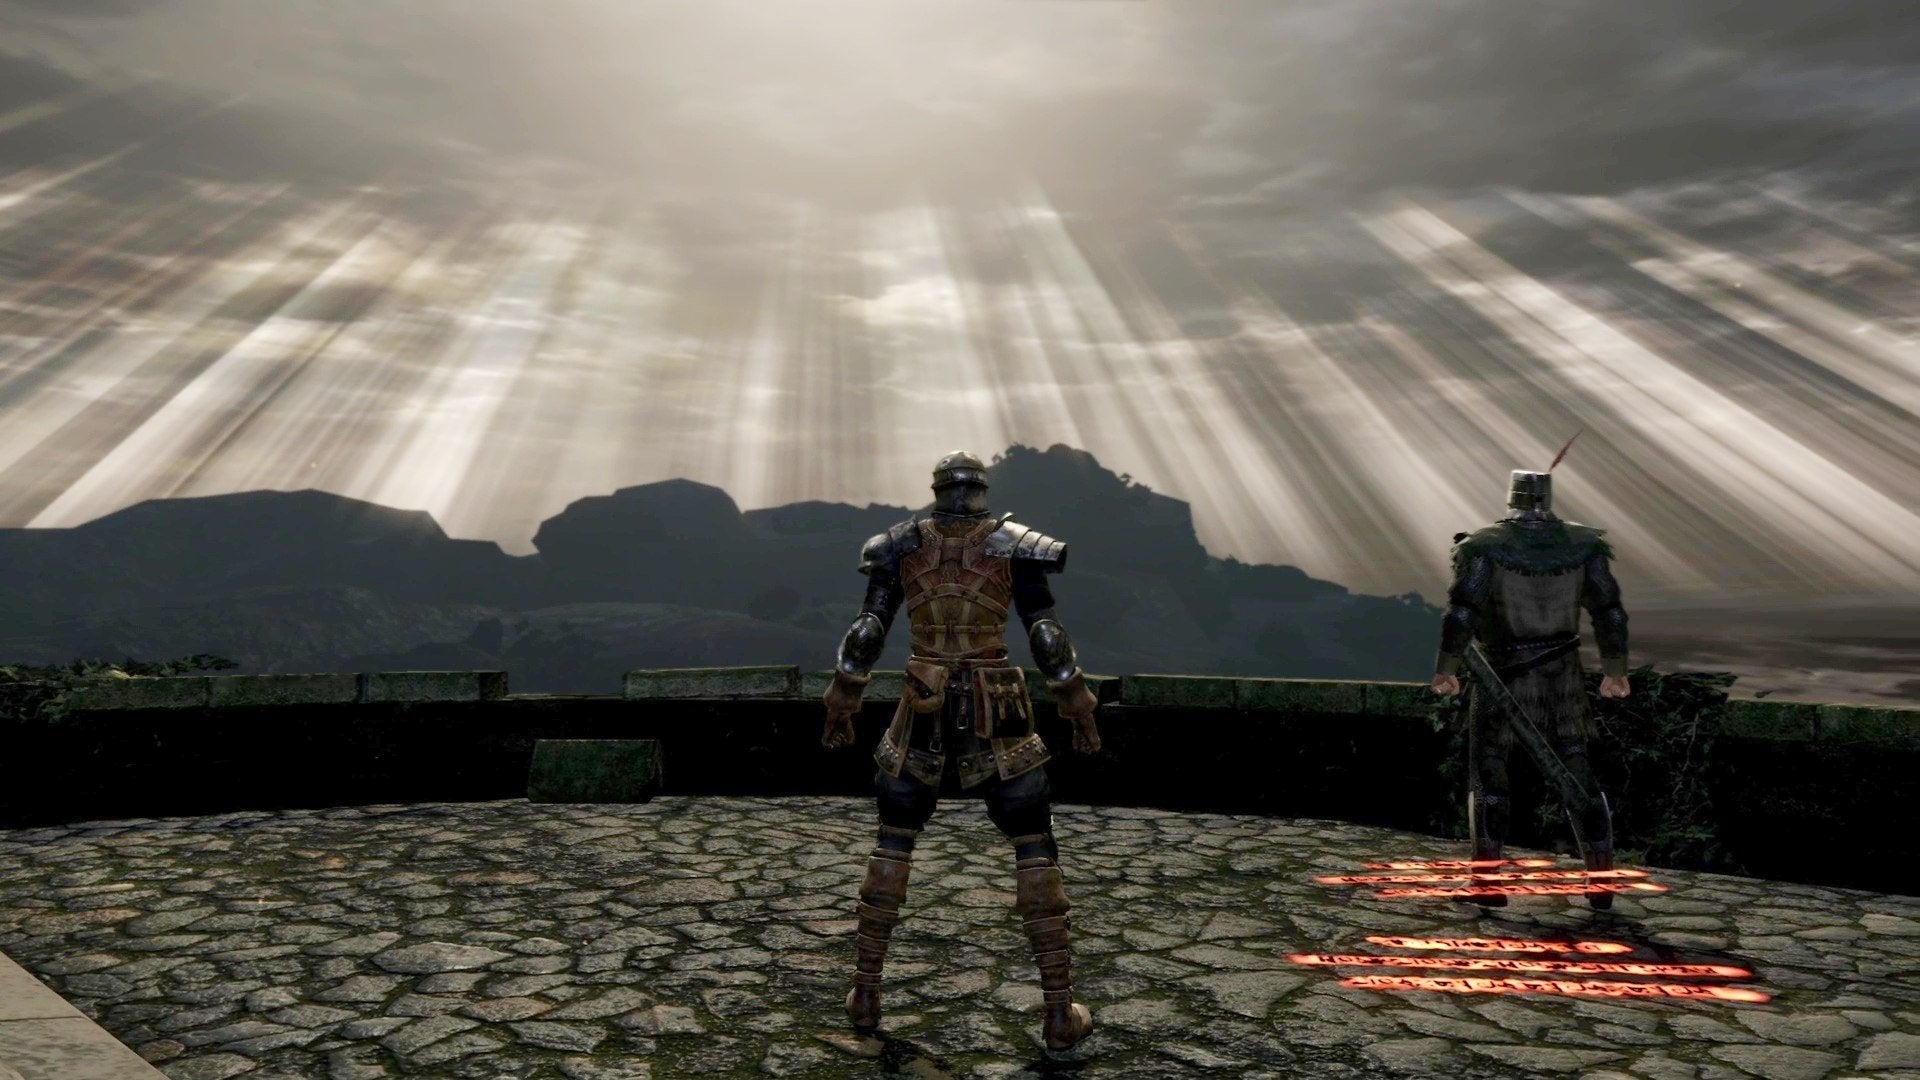 The Chosen Undead and Solaire staring at the sun.